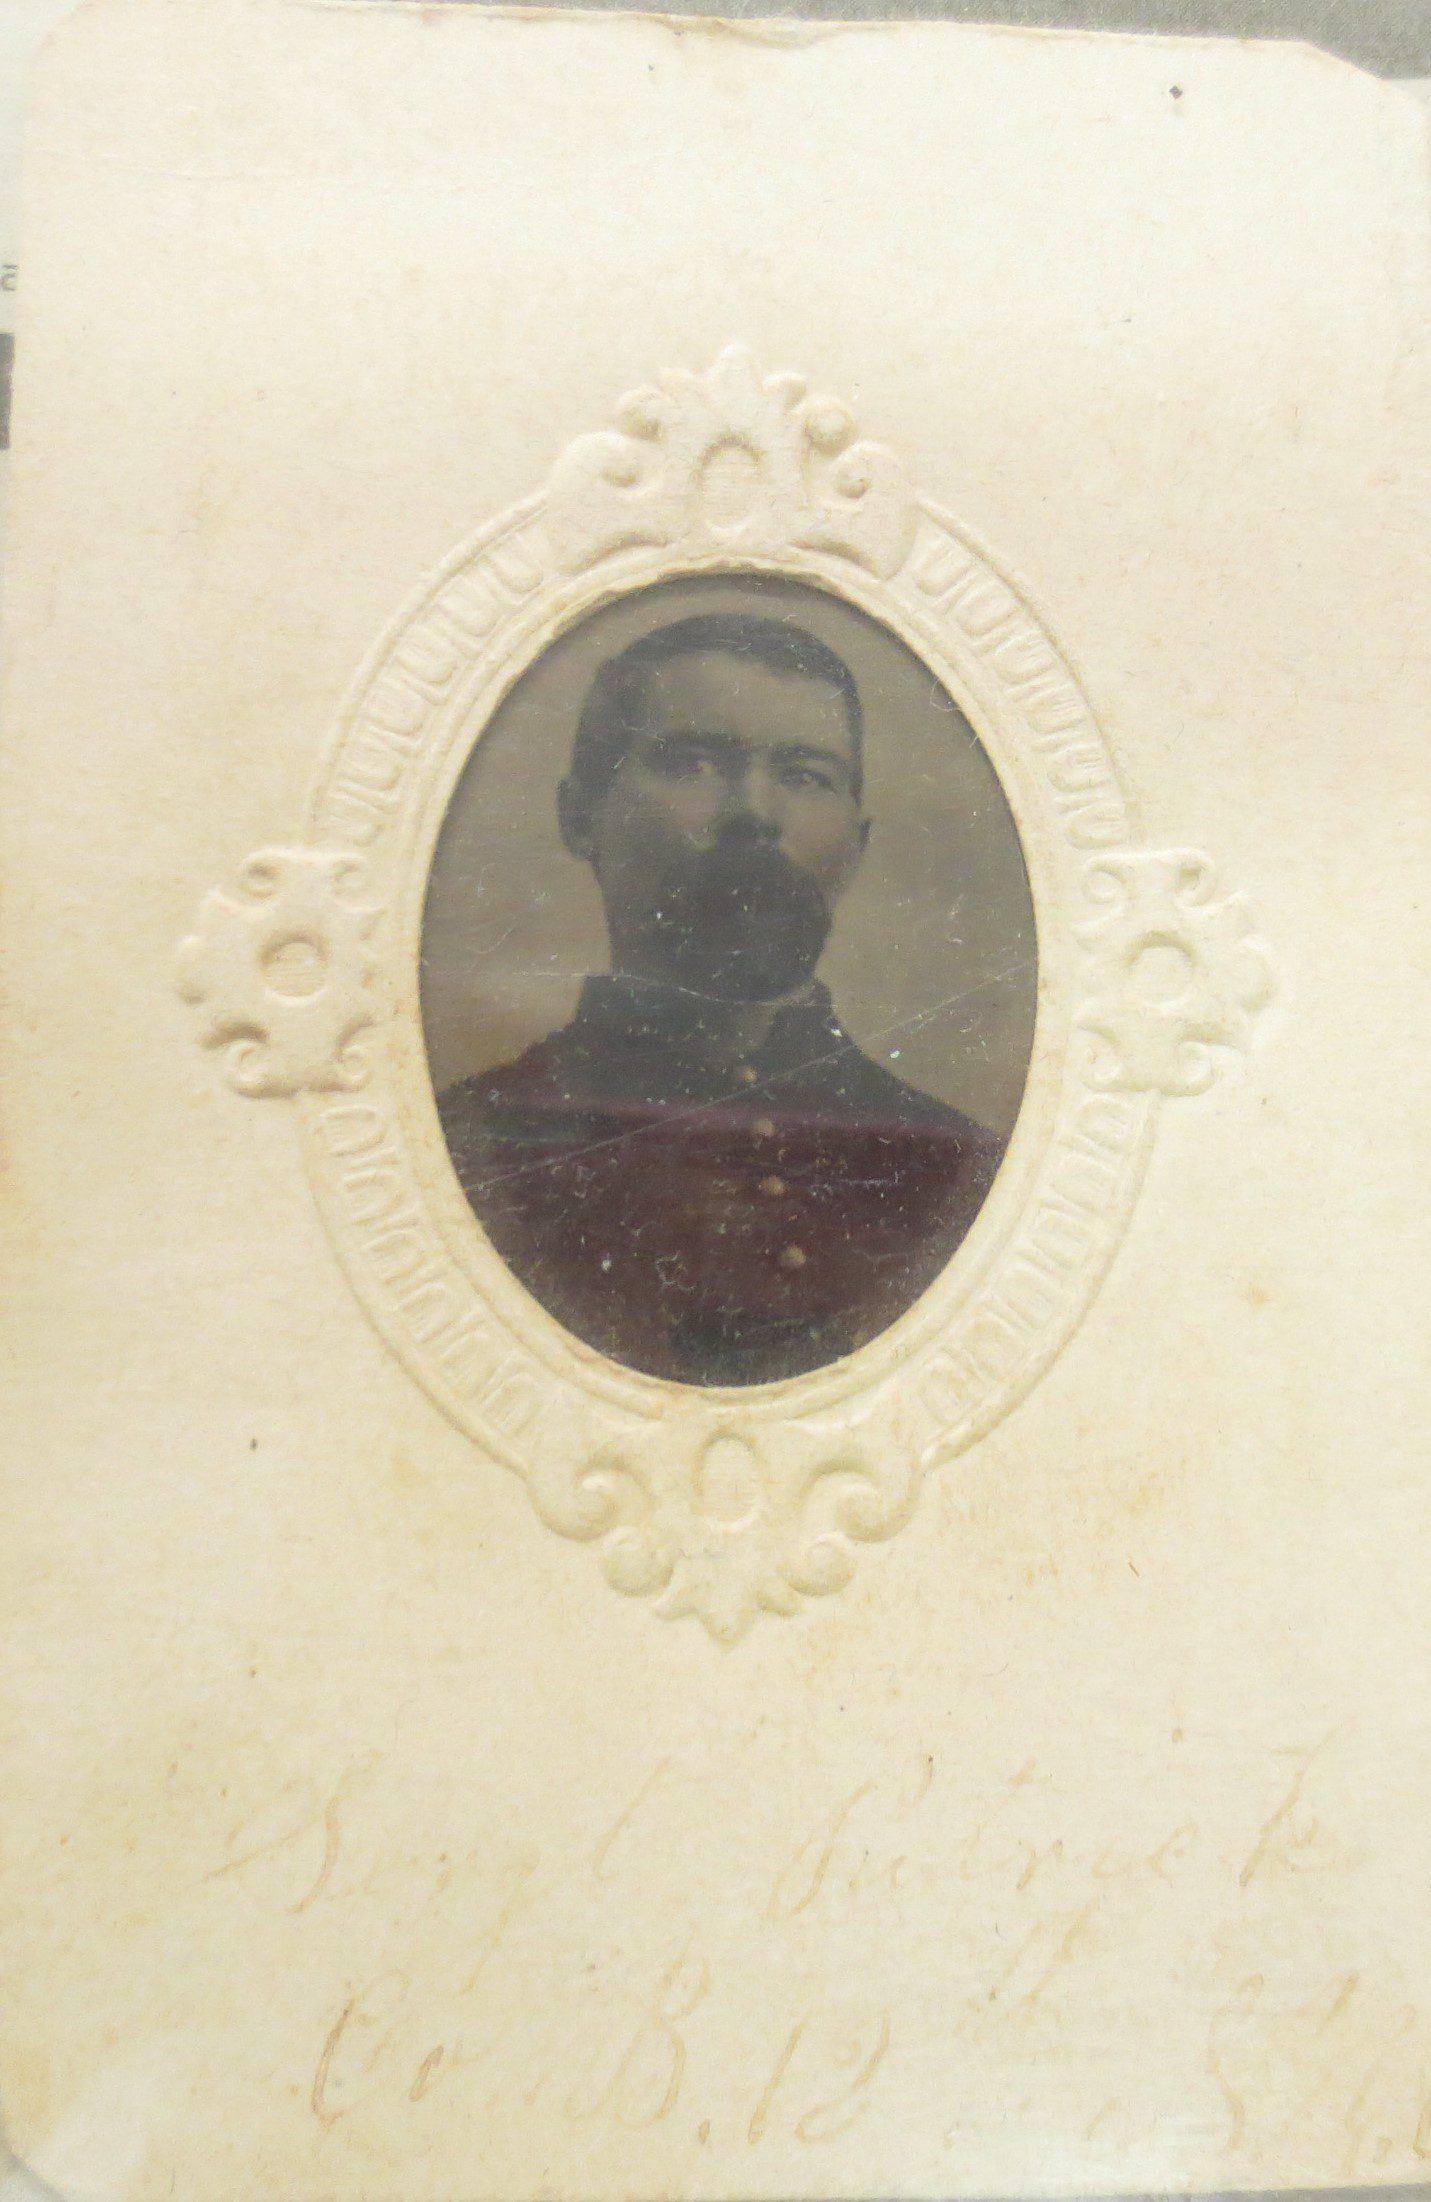 Blur picture of a man inside an oval frame